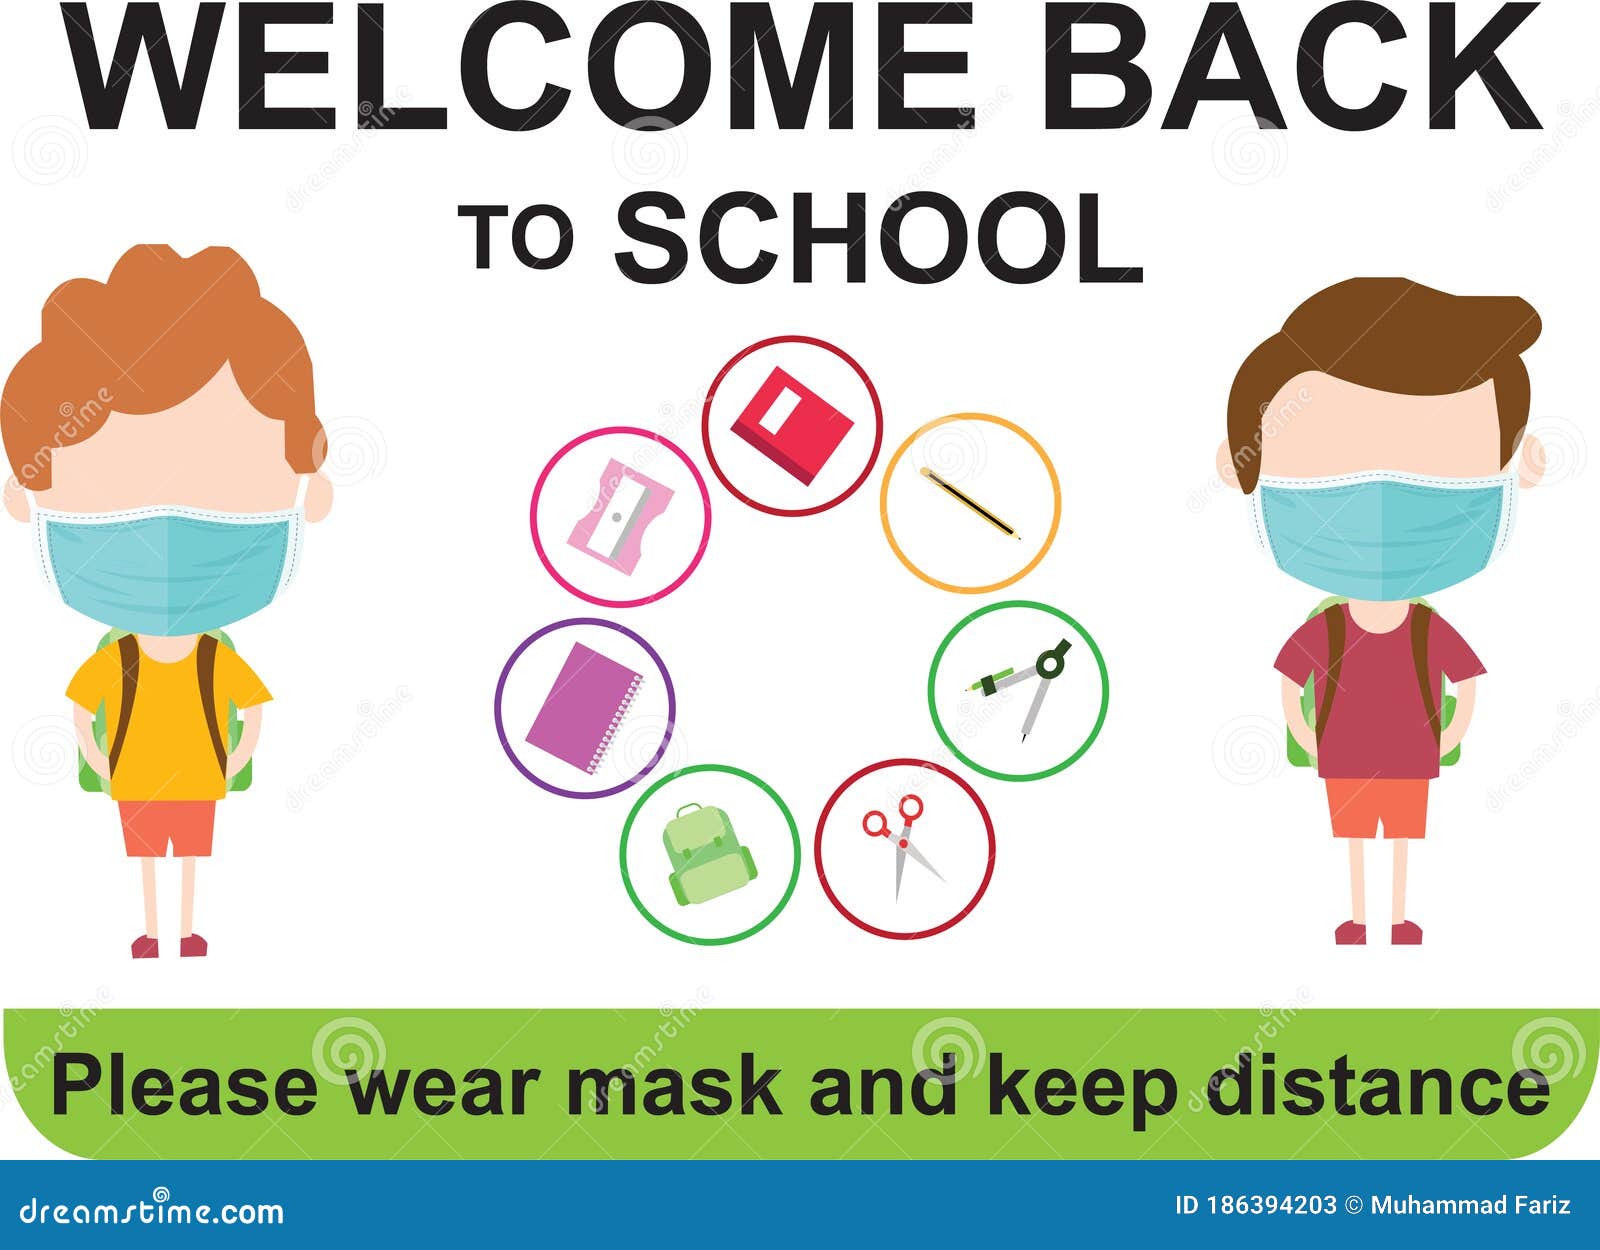 Children S Cartoons Welcome Back To School Keep Their Distance And Wear Masks Vector Illustrations For The Post Covid 19 Stock Vector Illustration Of Child Design